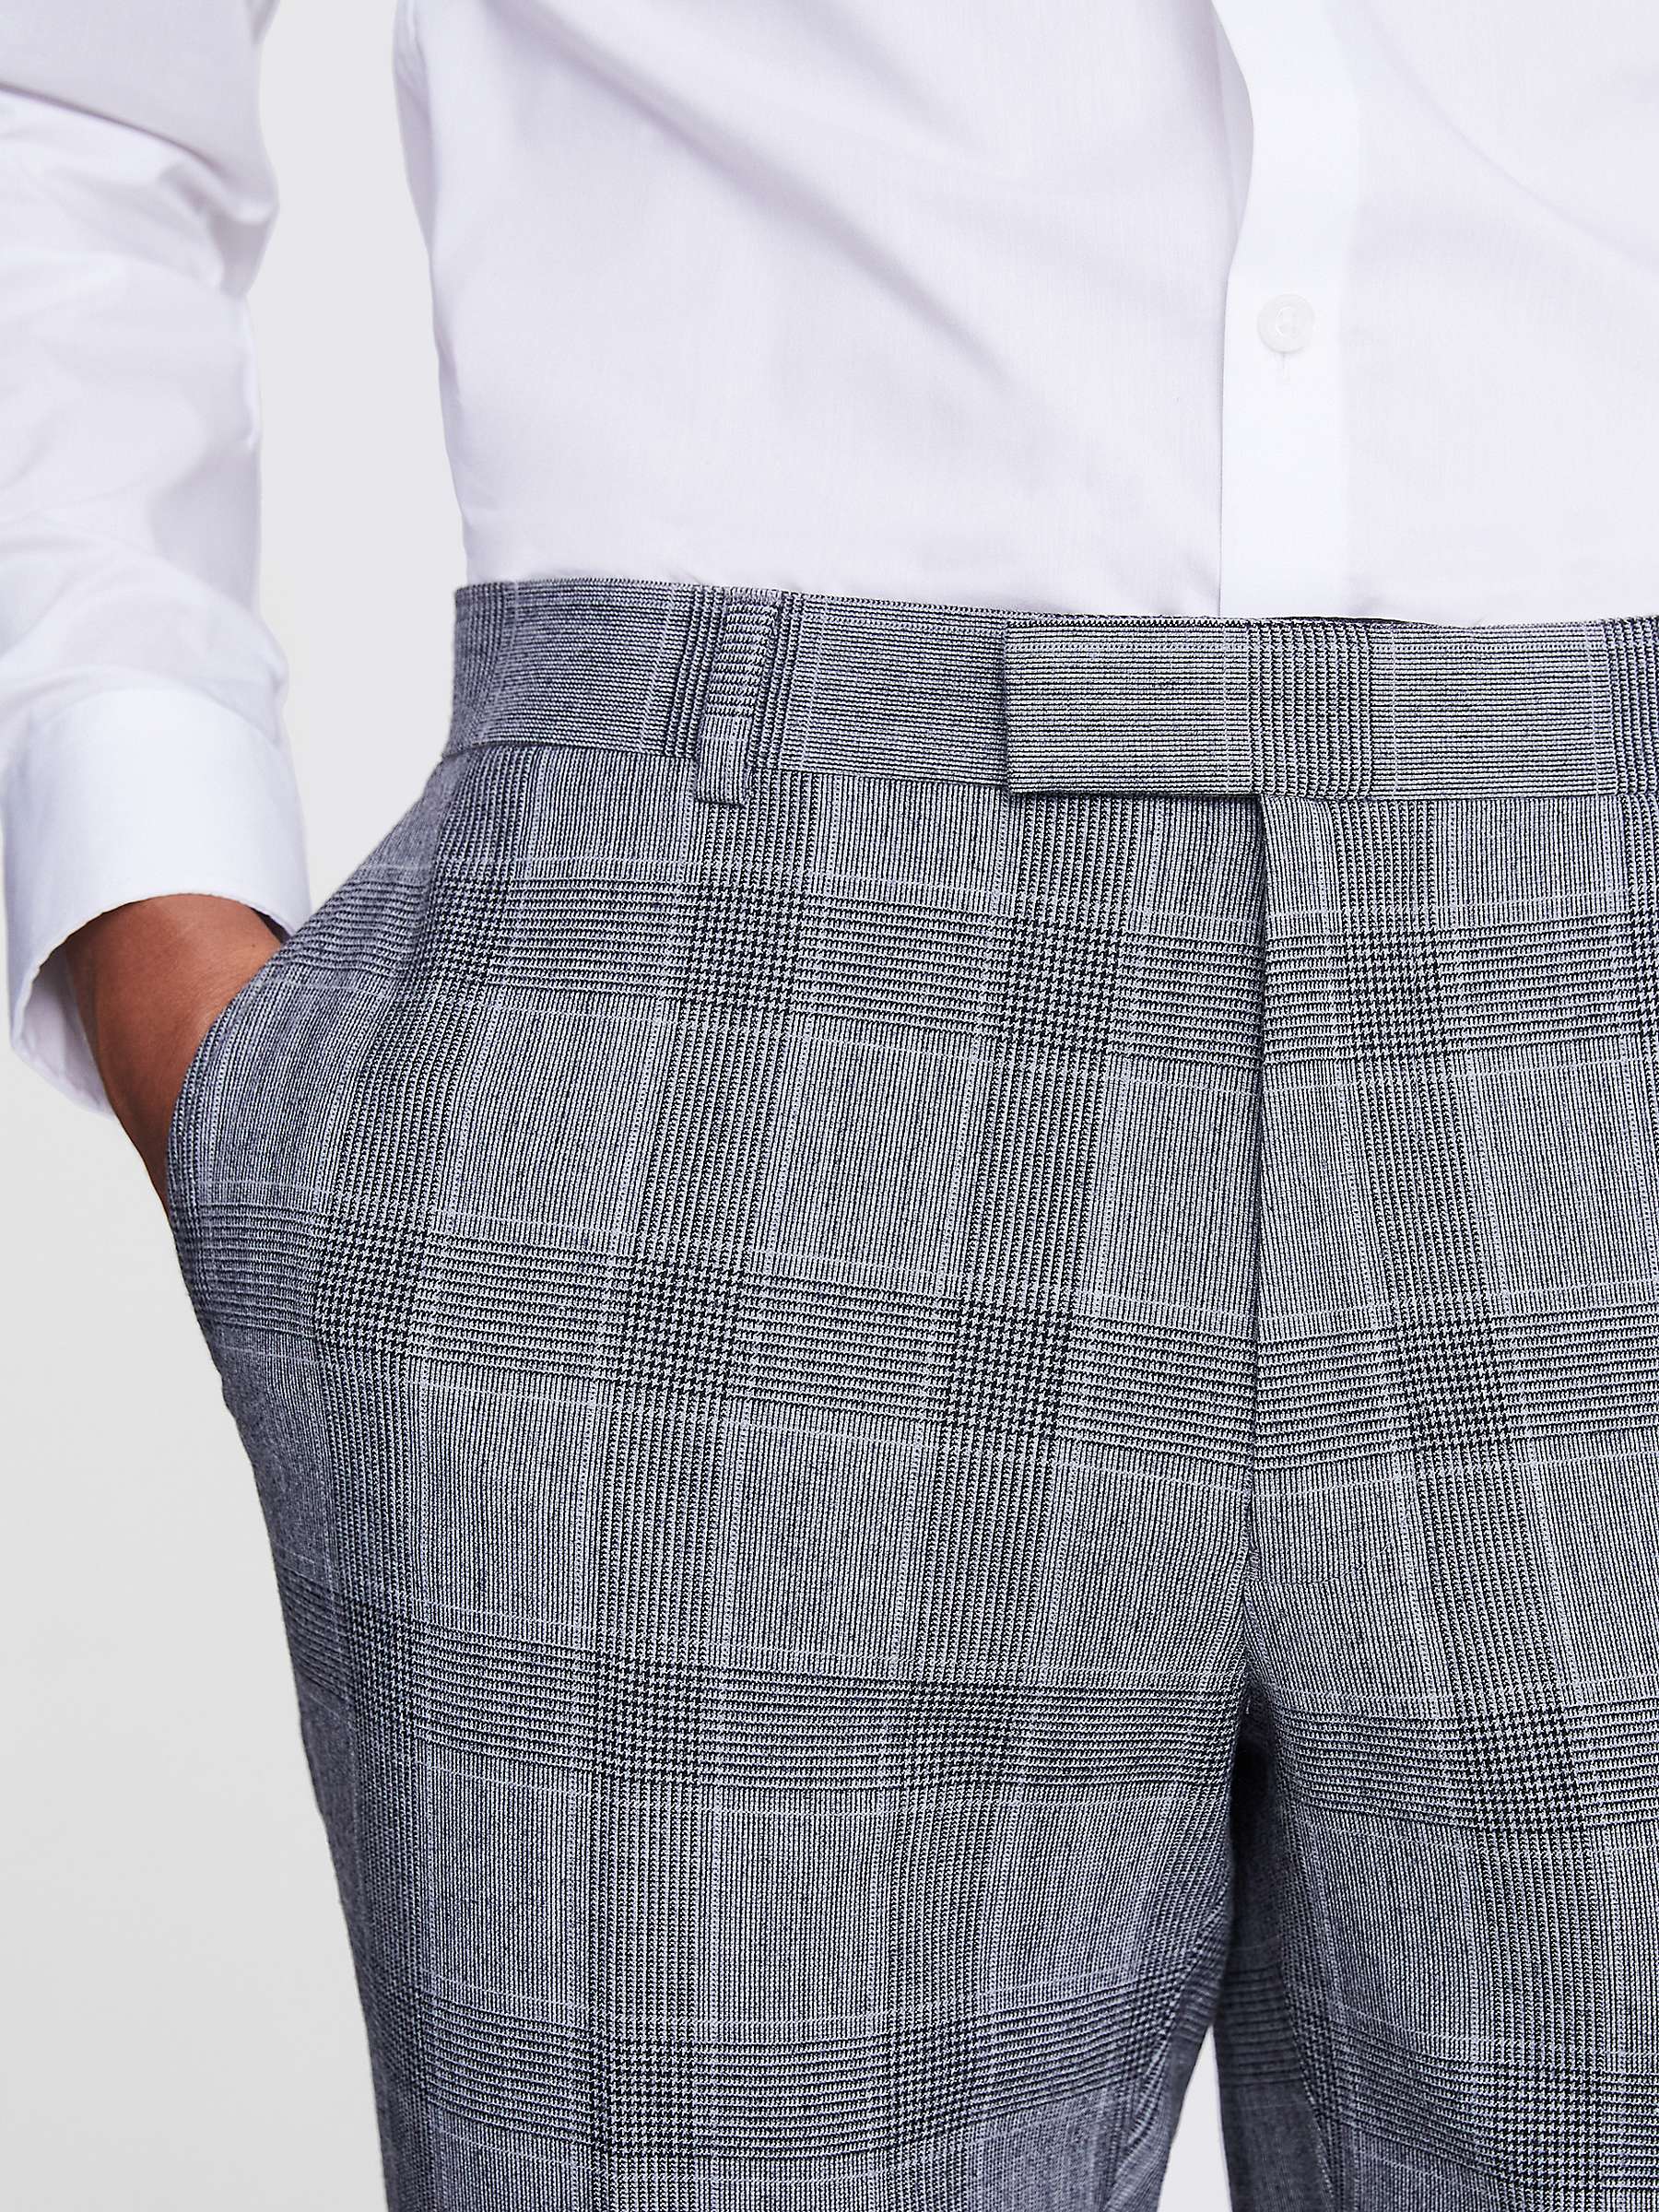 Buy Moss Tailored Fit Check Trousers, Grey Online at johnlewis.com